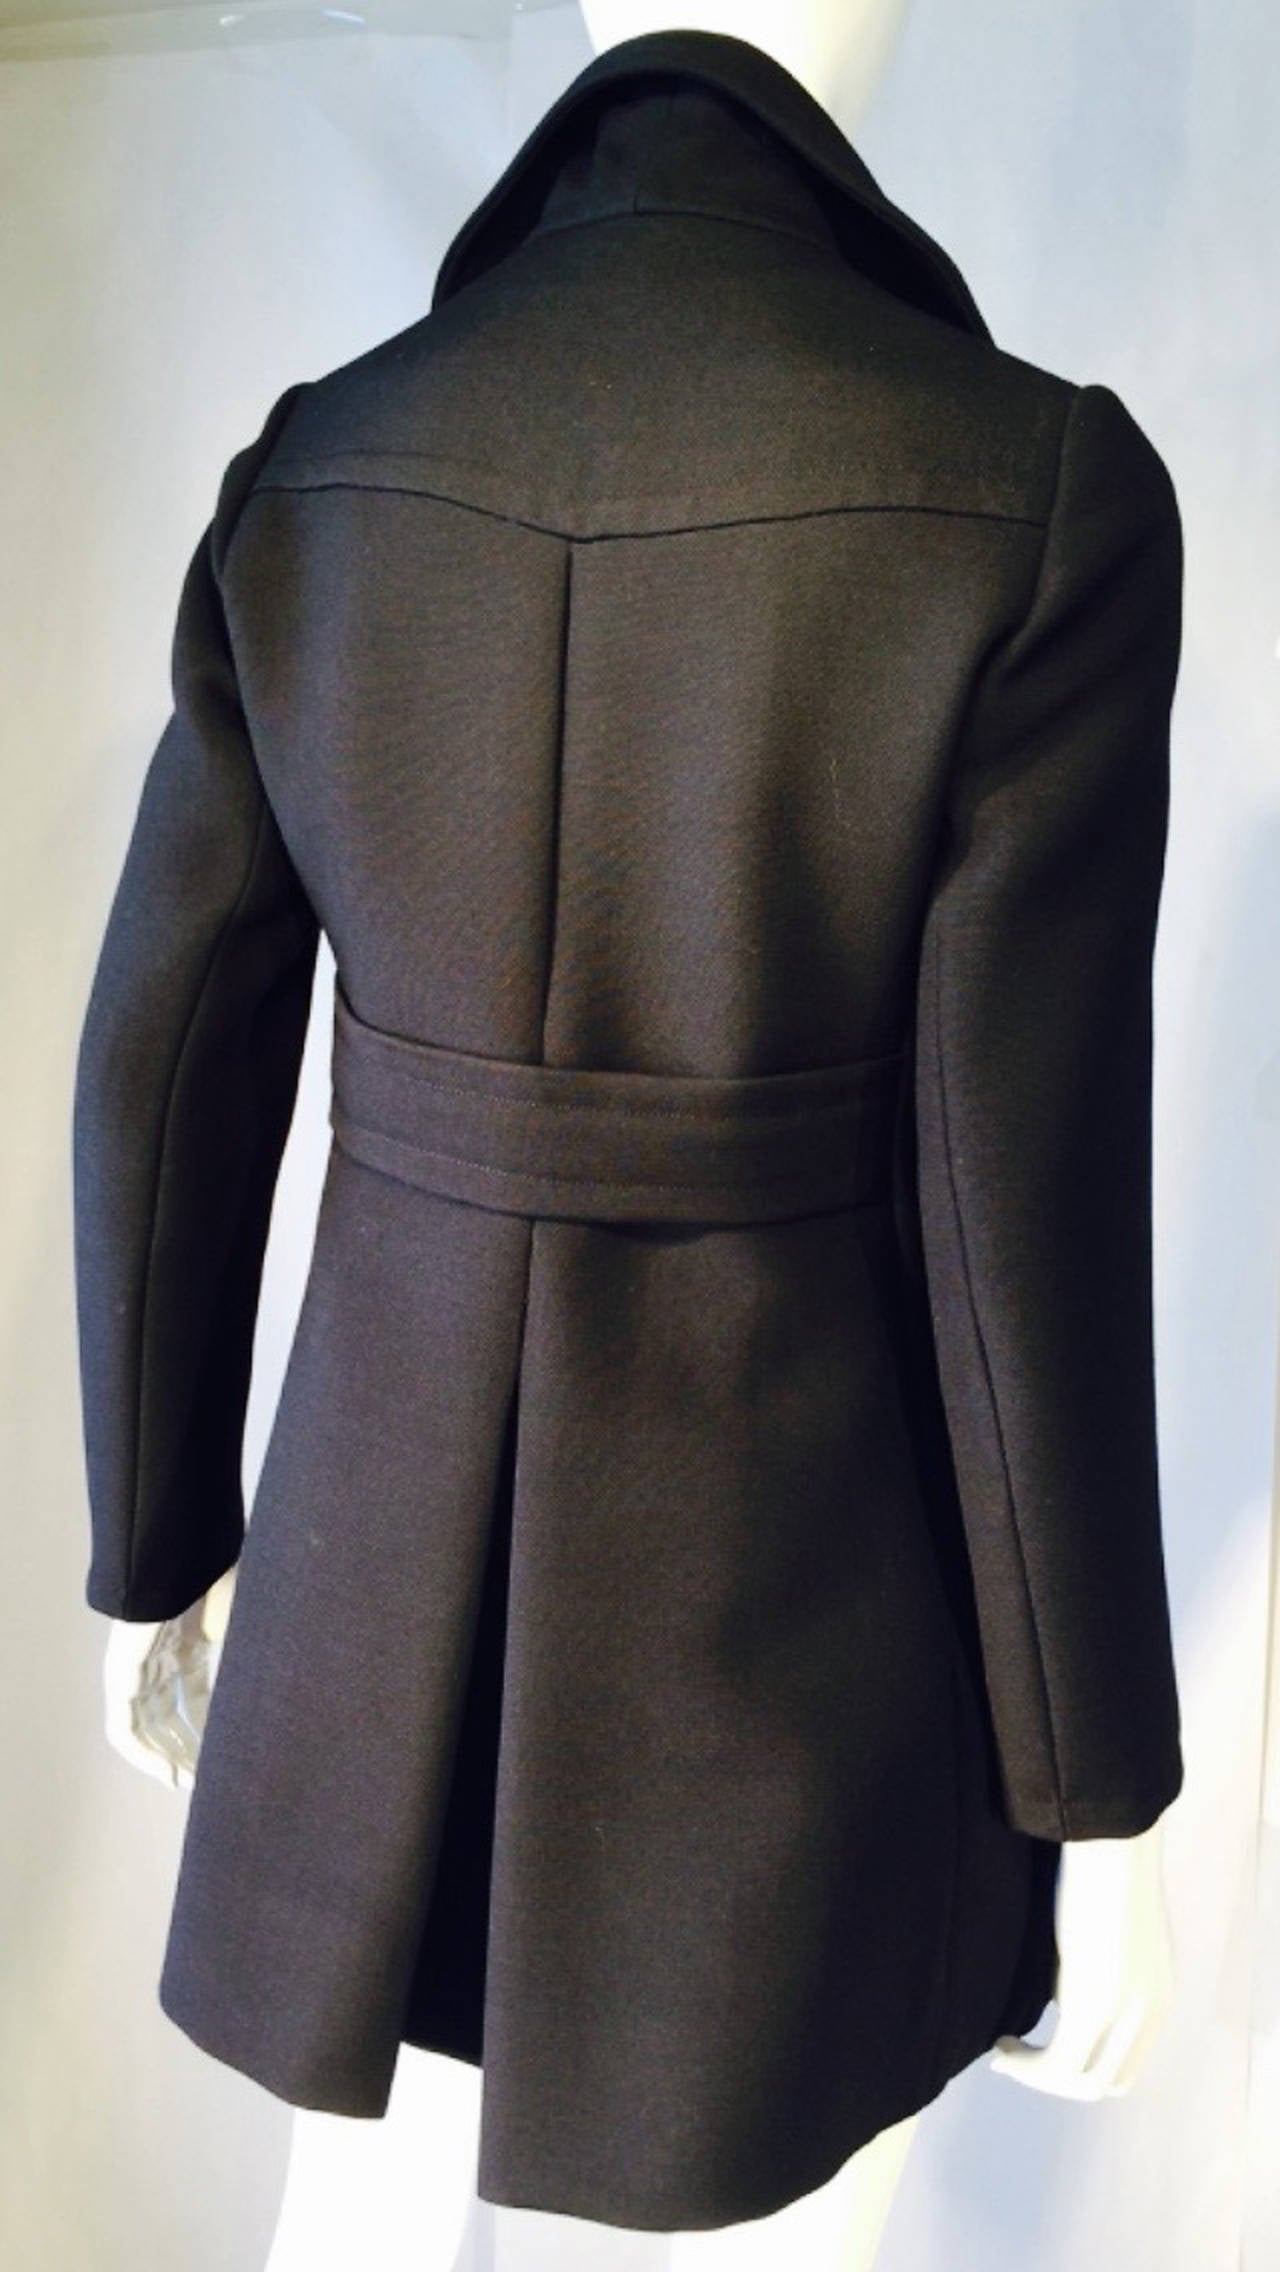 A fine and rare vintage Pierre Balmain pea coat. Authentic jet-black woven wool item features hand construction, precision seams, side pockets and large notched collar. Attached back half belt secures generous back center pleats. Pristine appears